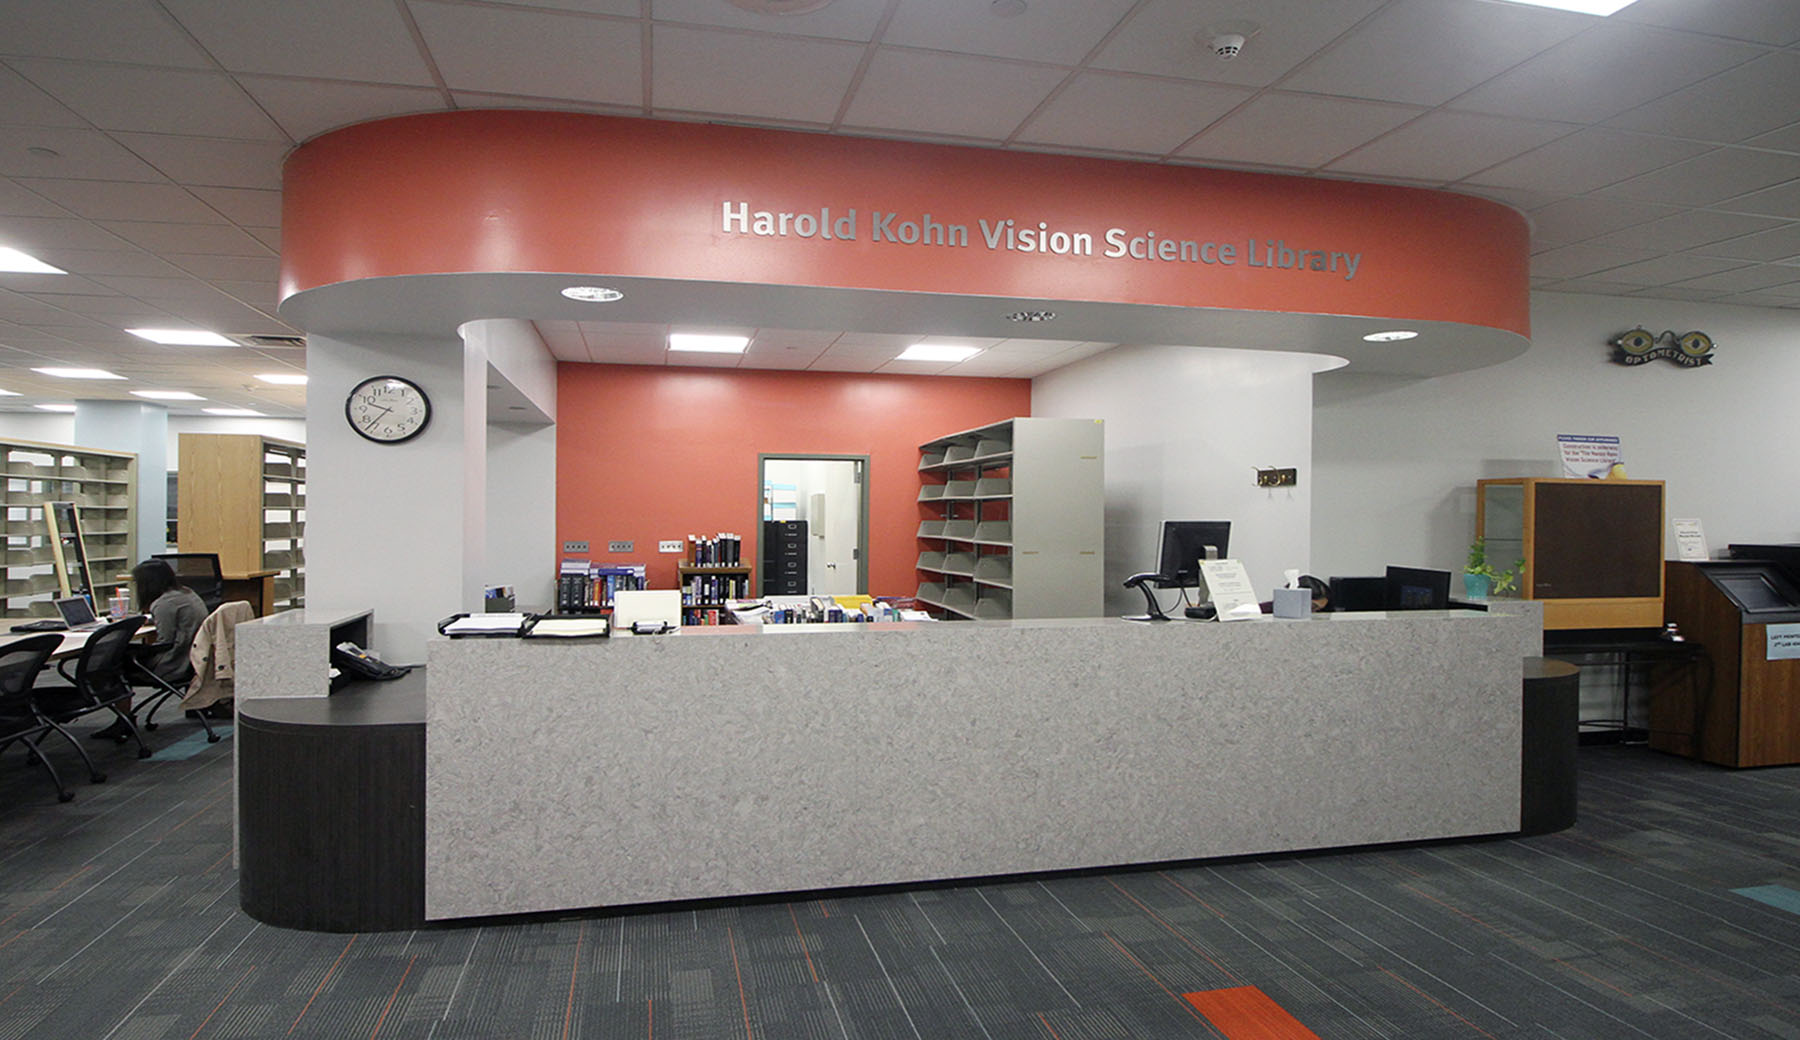 A custom designed Circulation Desk is the focal point upon entry to the Harold Kohn Vision Science Library at the SUNY College of Optometry. It accomplishes Universal Design by incorporating transaction surfaces at varying heights. The use of quartz and high-pressure laminate creates a high-end look while offering durability for the high traffic space.